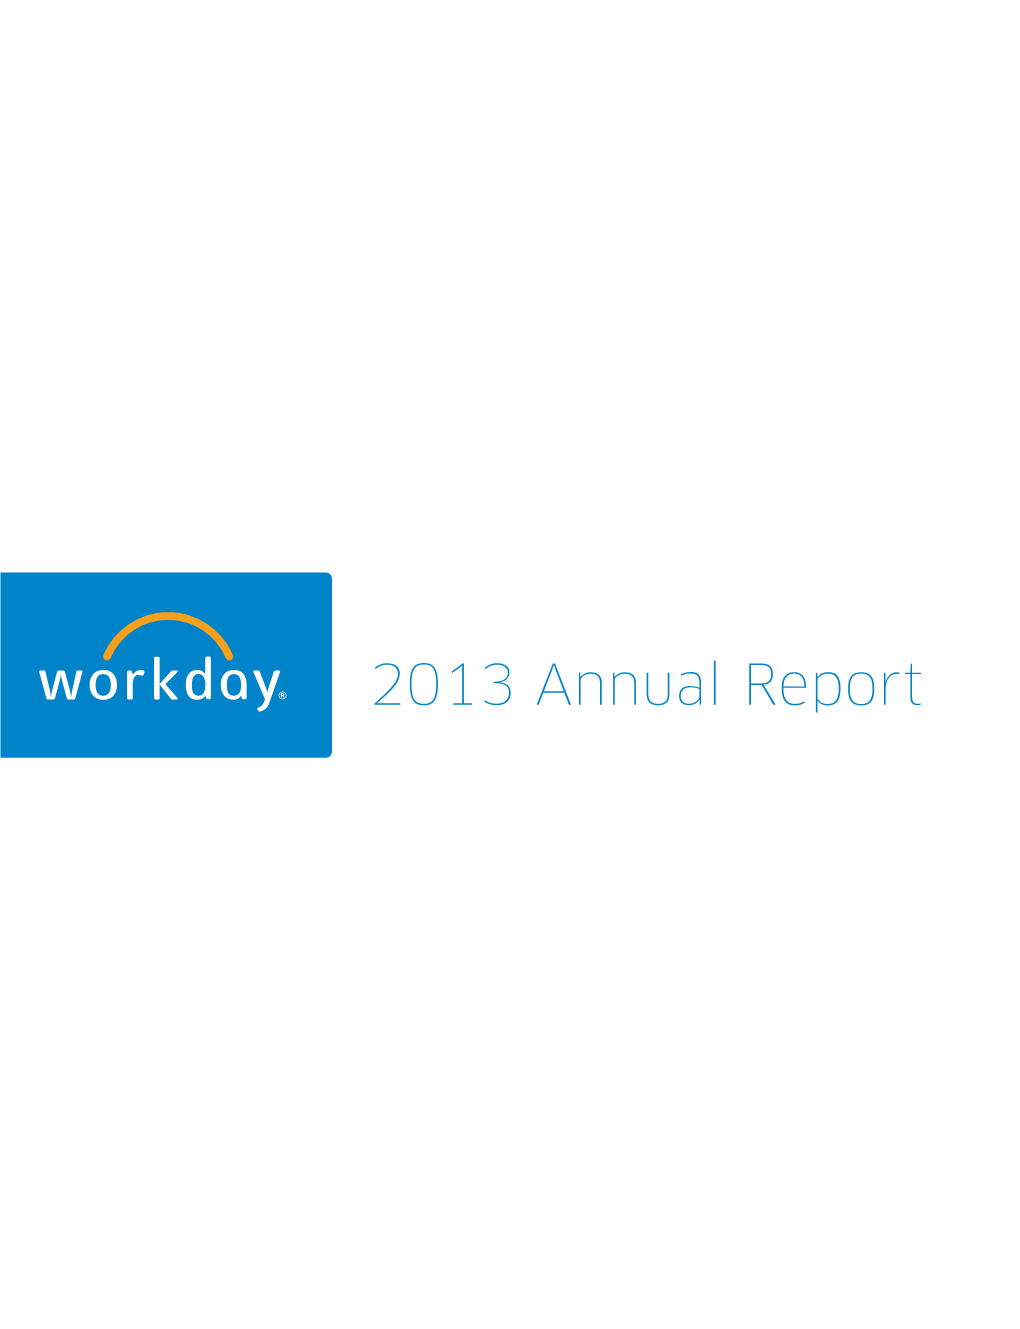 Fiscal-2013-Annual-Report-And-Proxy